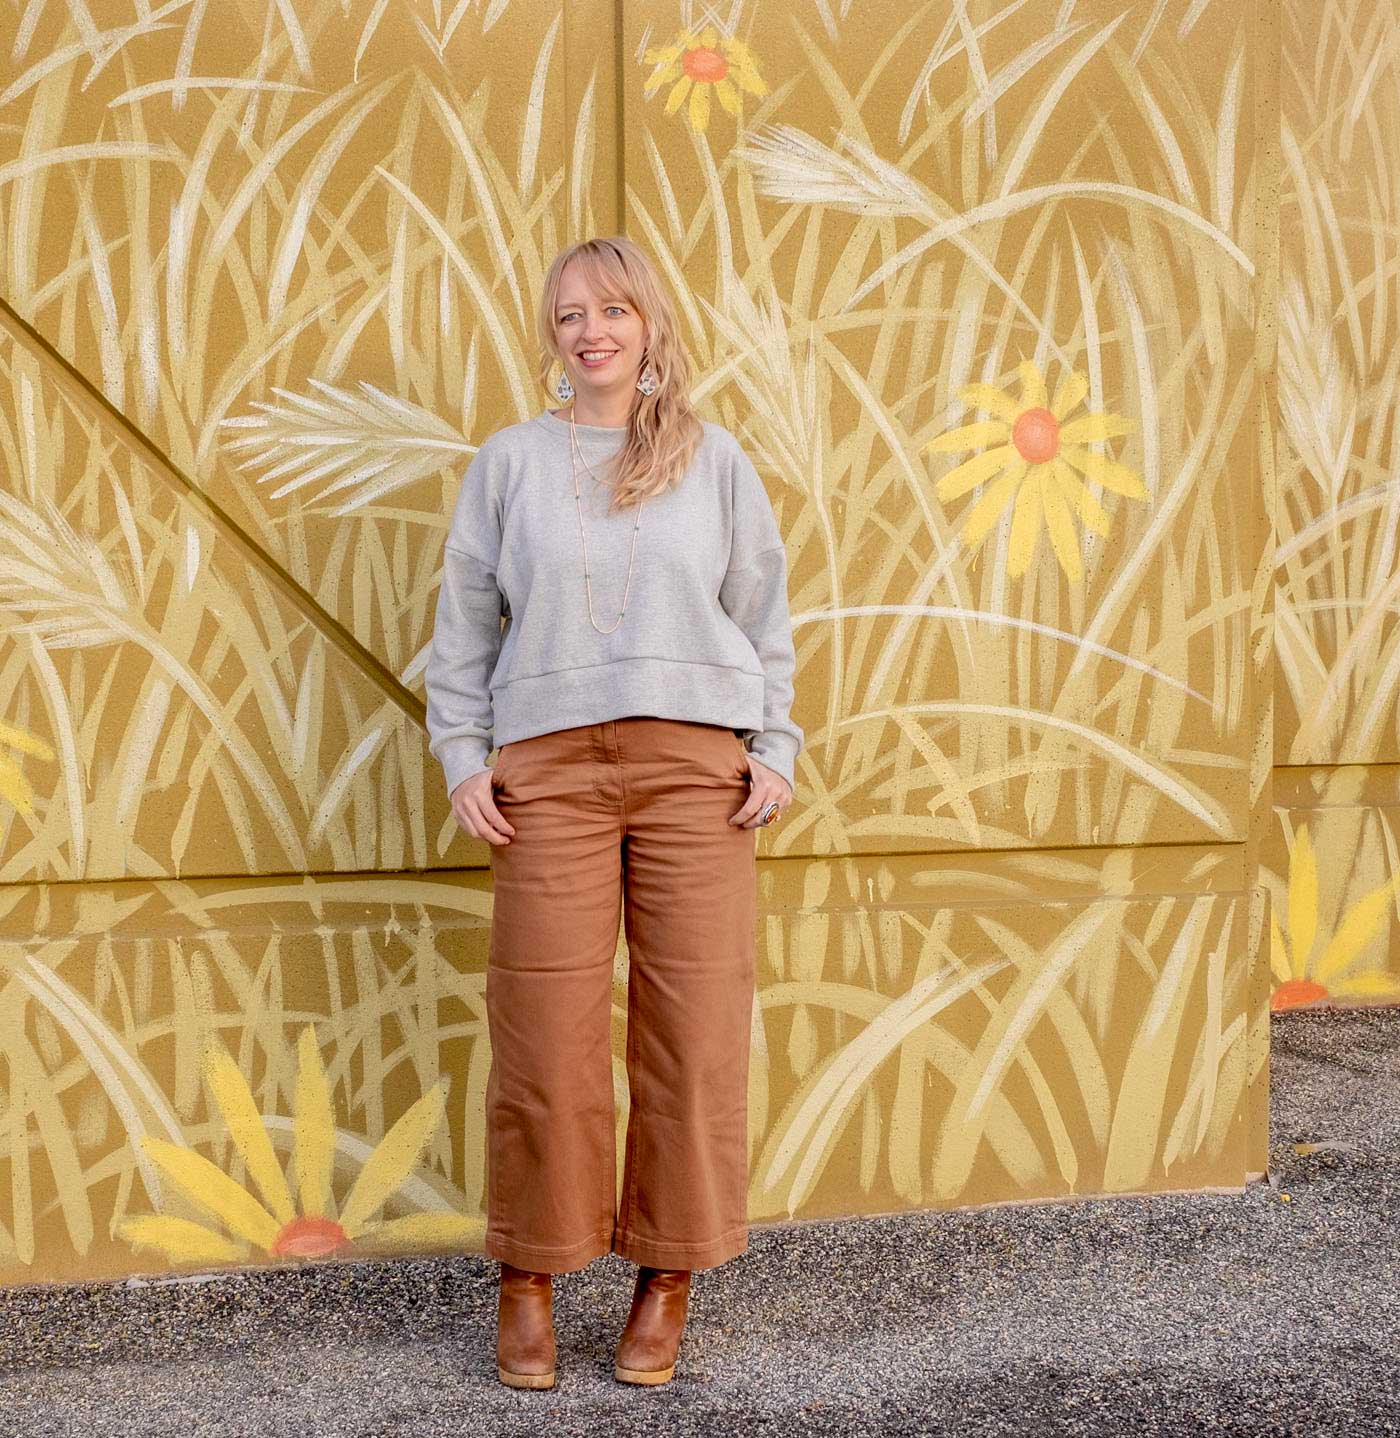 Amber wearing the Hosta sweatshirt—a slightly cropped, long sleeve, crew neck top—brown wide leg pants, and clog boots.